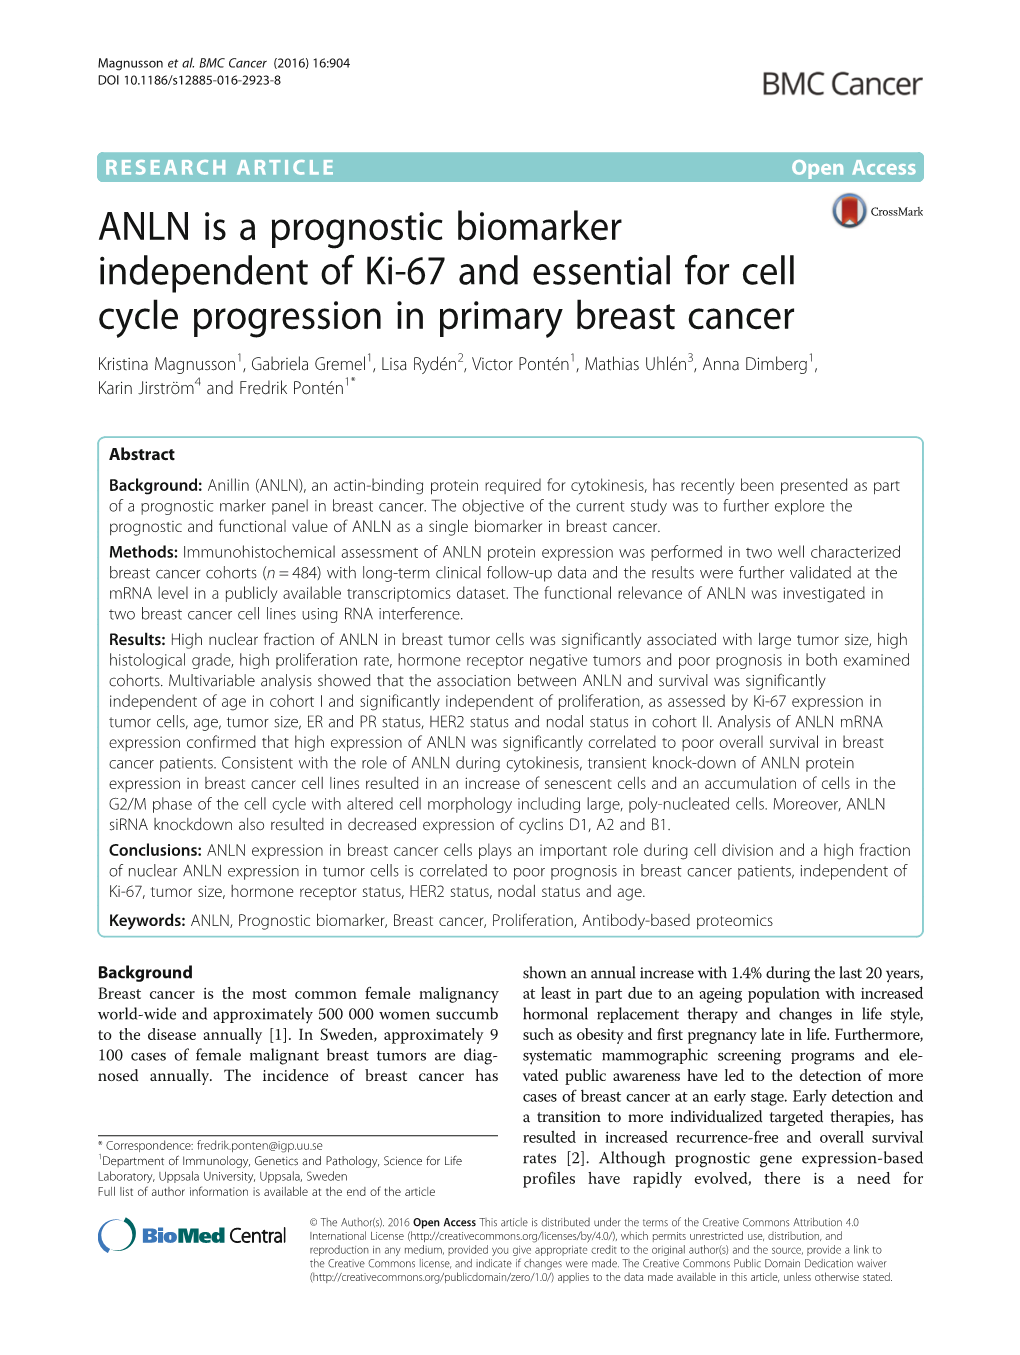 ANLN Is a Prognostic Biomarker Independent of Ki-67 and Essential